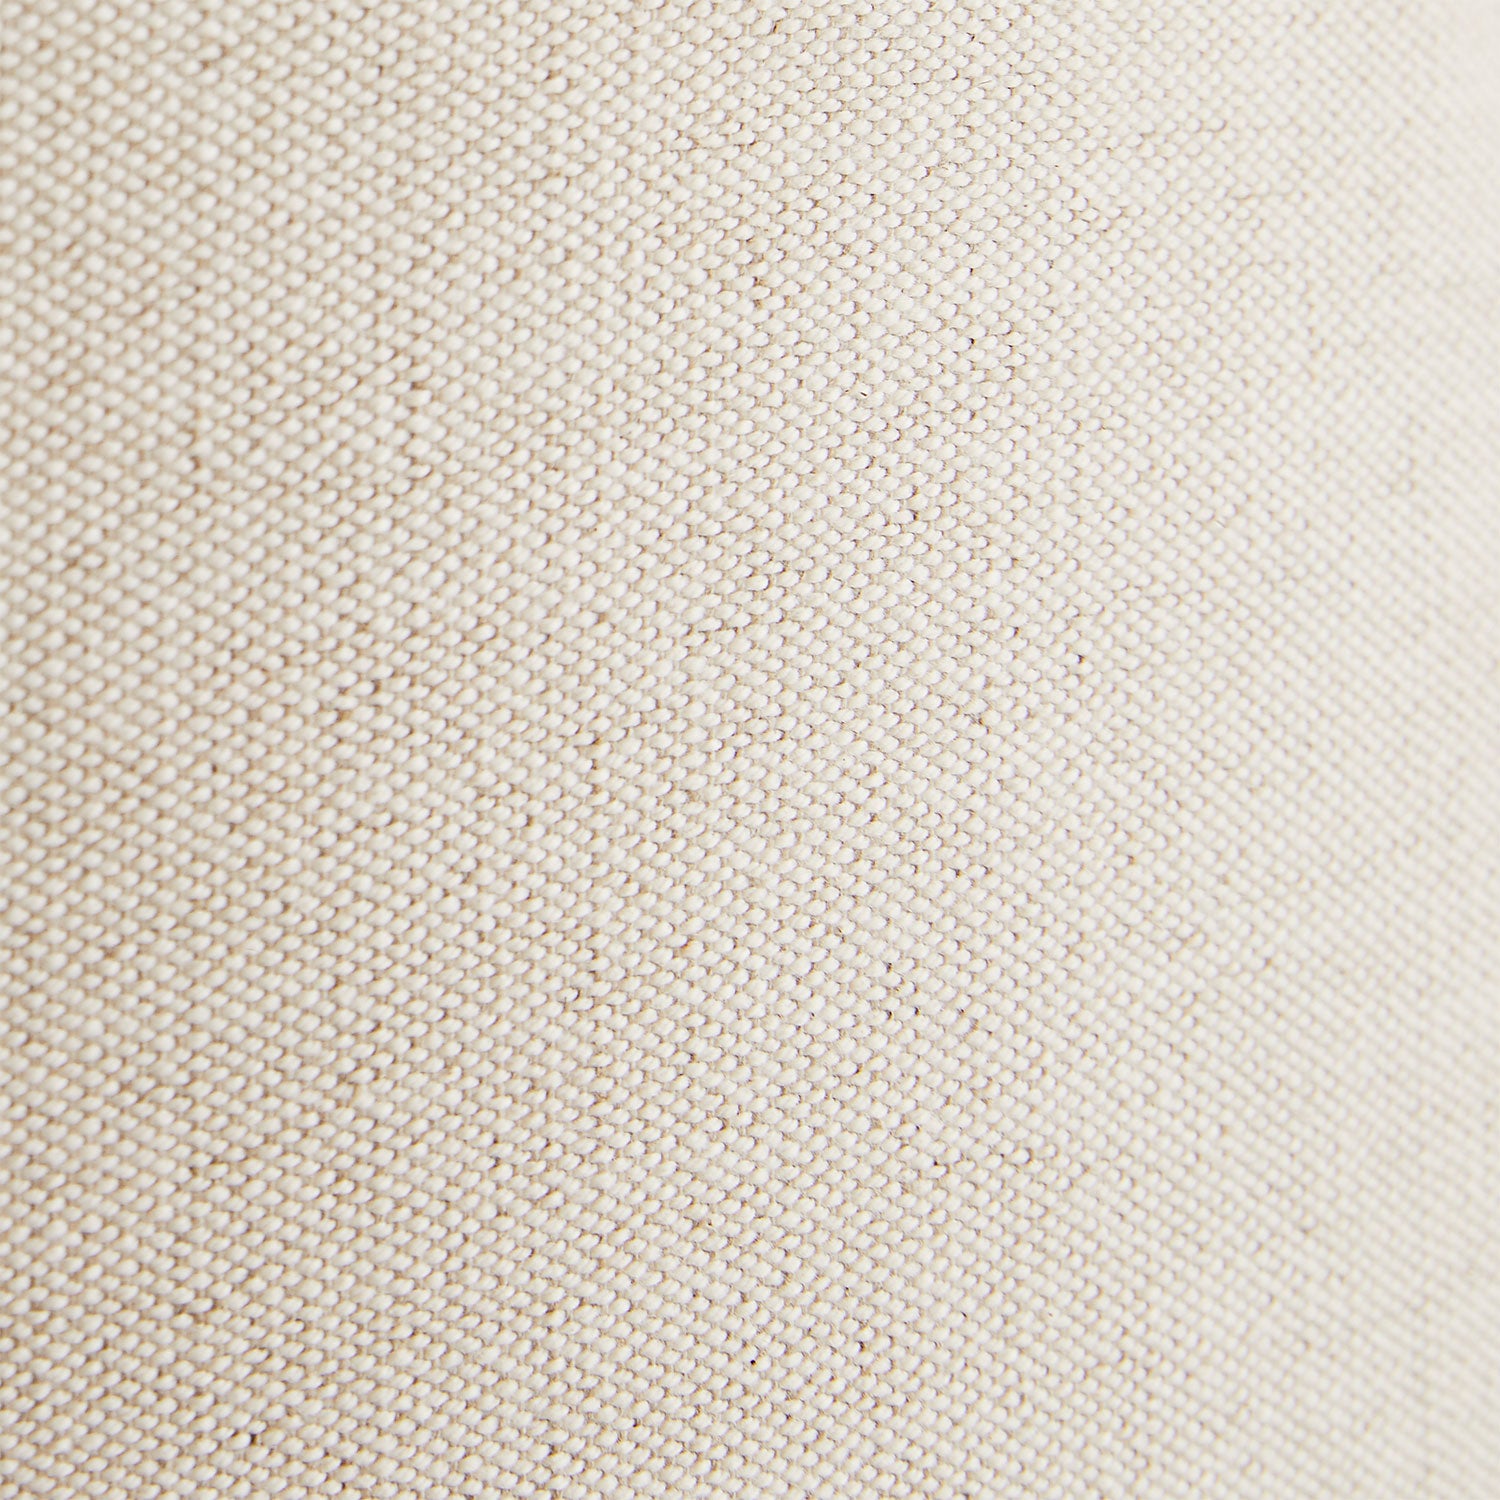 Close-up of fine, tightly woven beige fabric with uniform pattern.